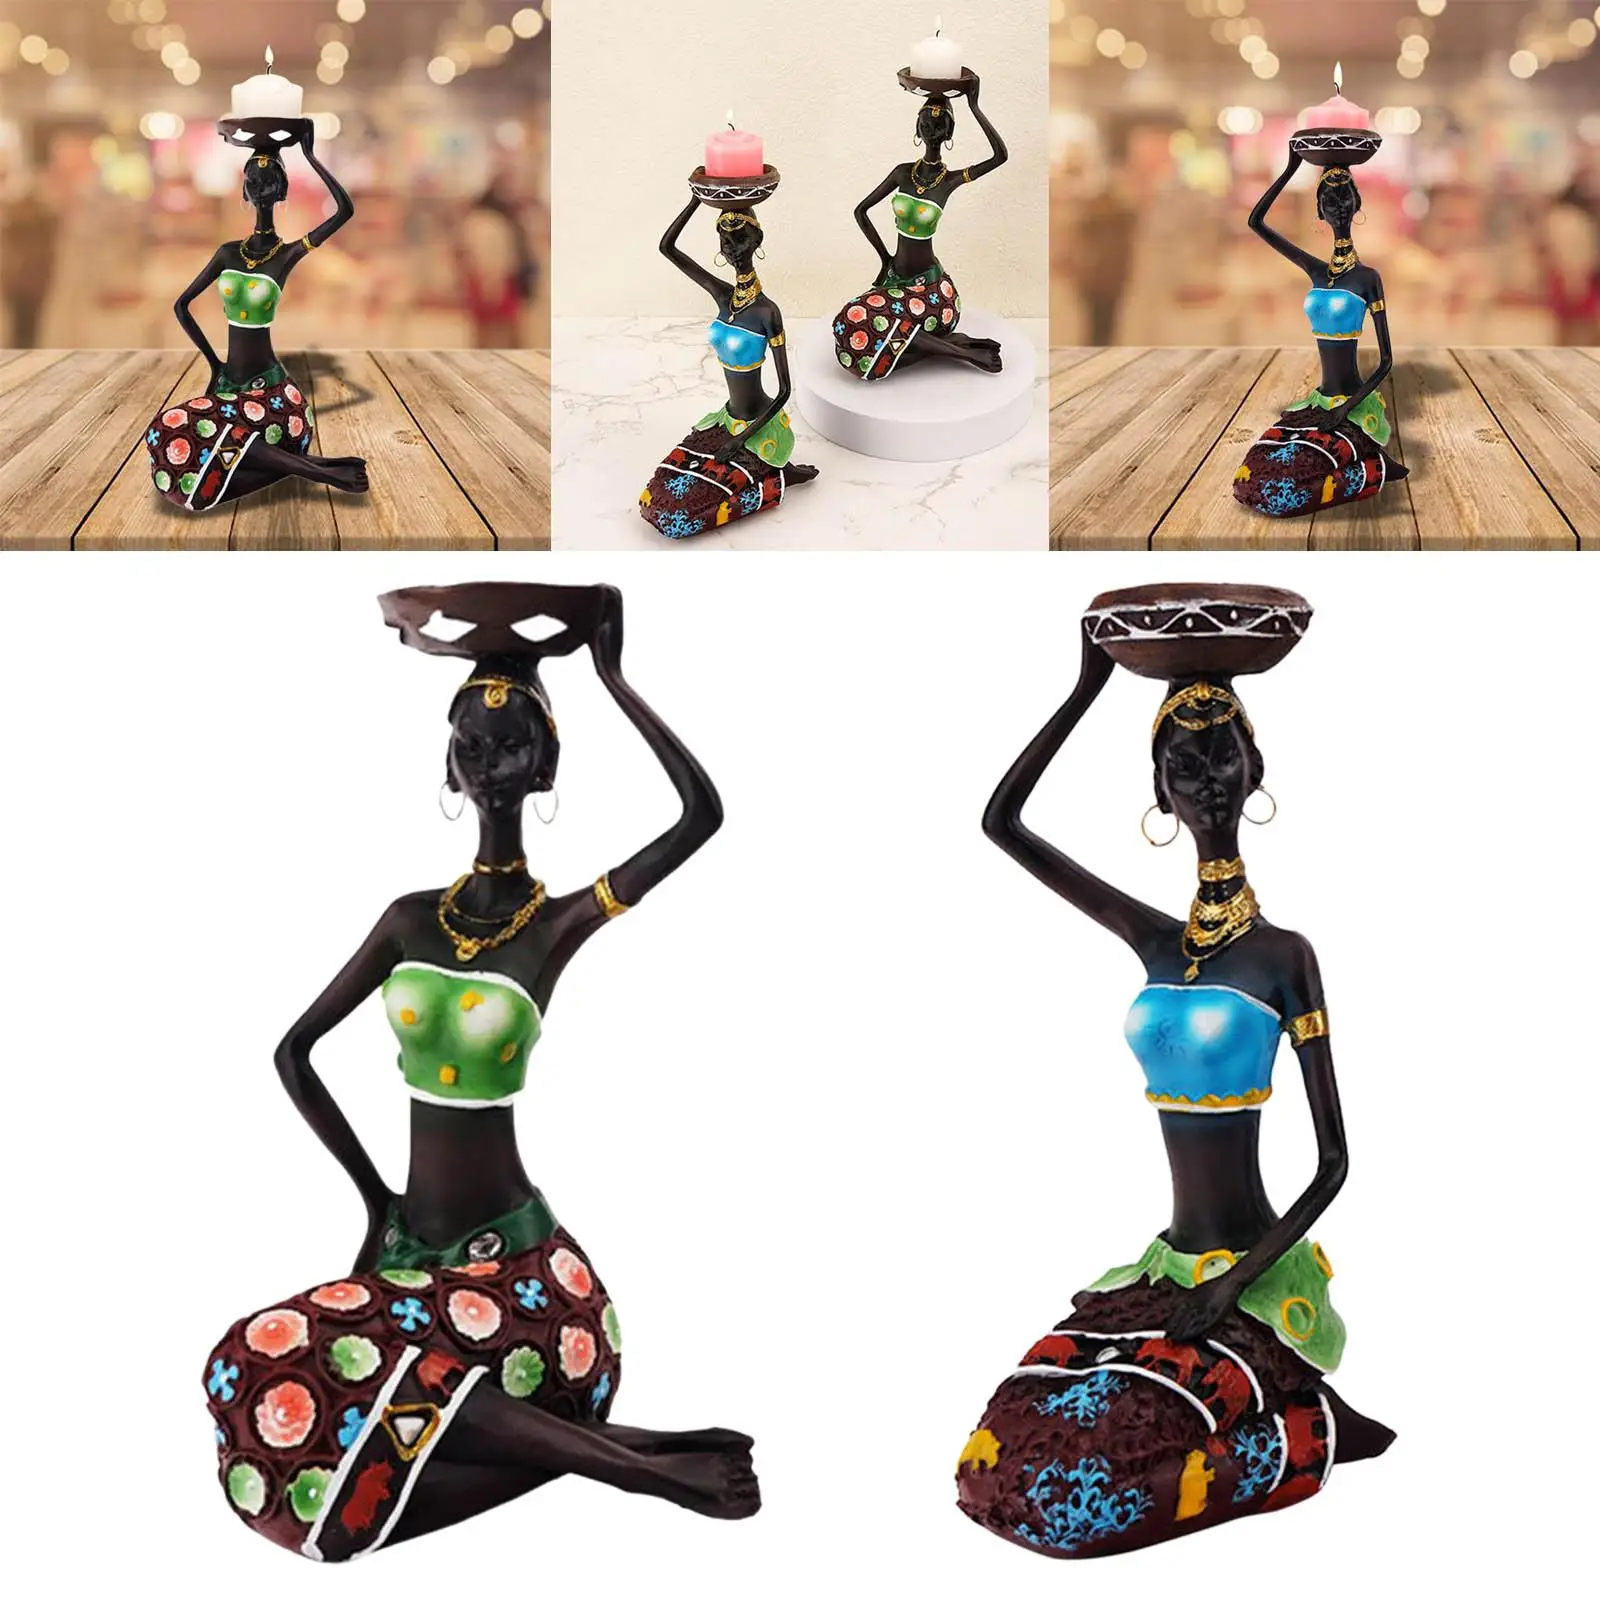 Creative African Women Statues Candlestick Tea Lights Candleholder Tribal Lady Desktop for Home Accents Pillar Candle Bedroom